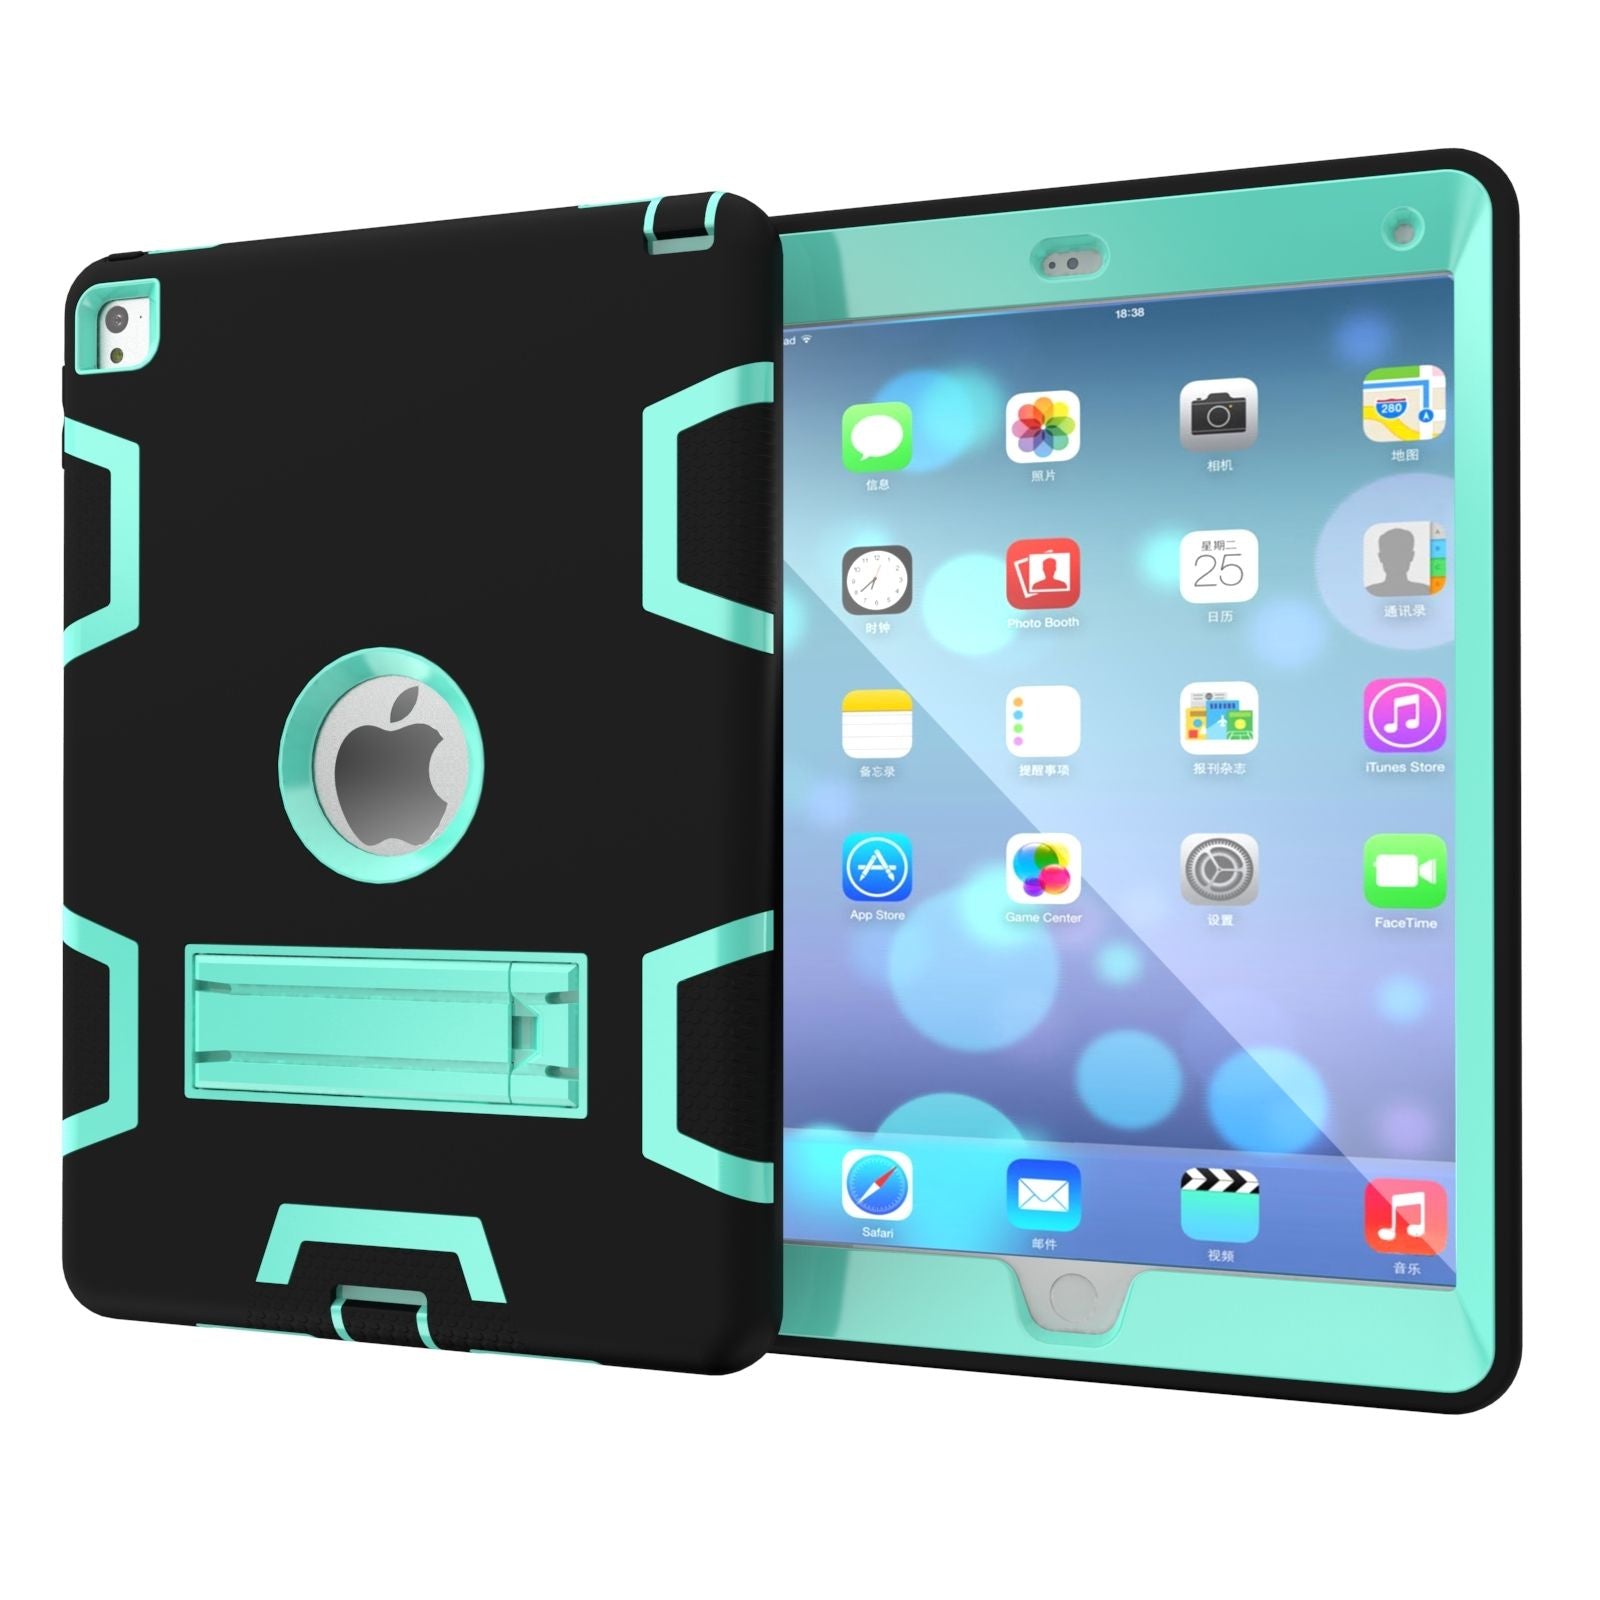 iPad 2 Case Three Layer Heavy Duty Shockproof Protective Case for iPad 2 - The Shopsite